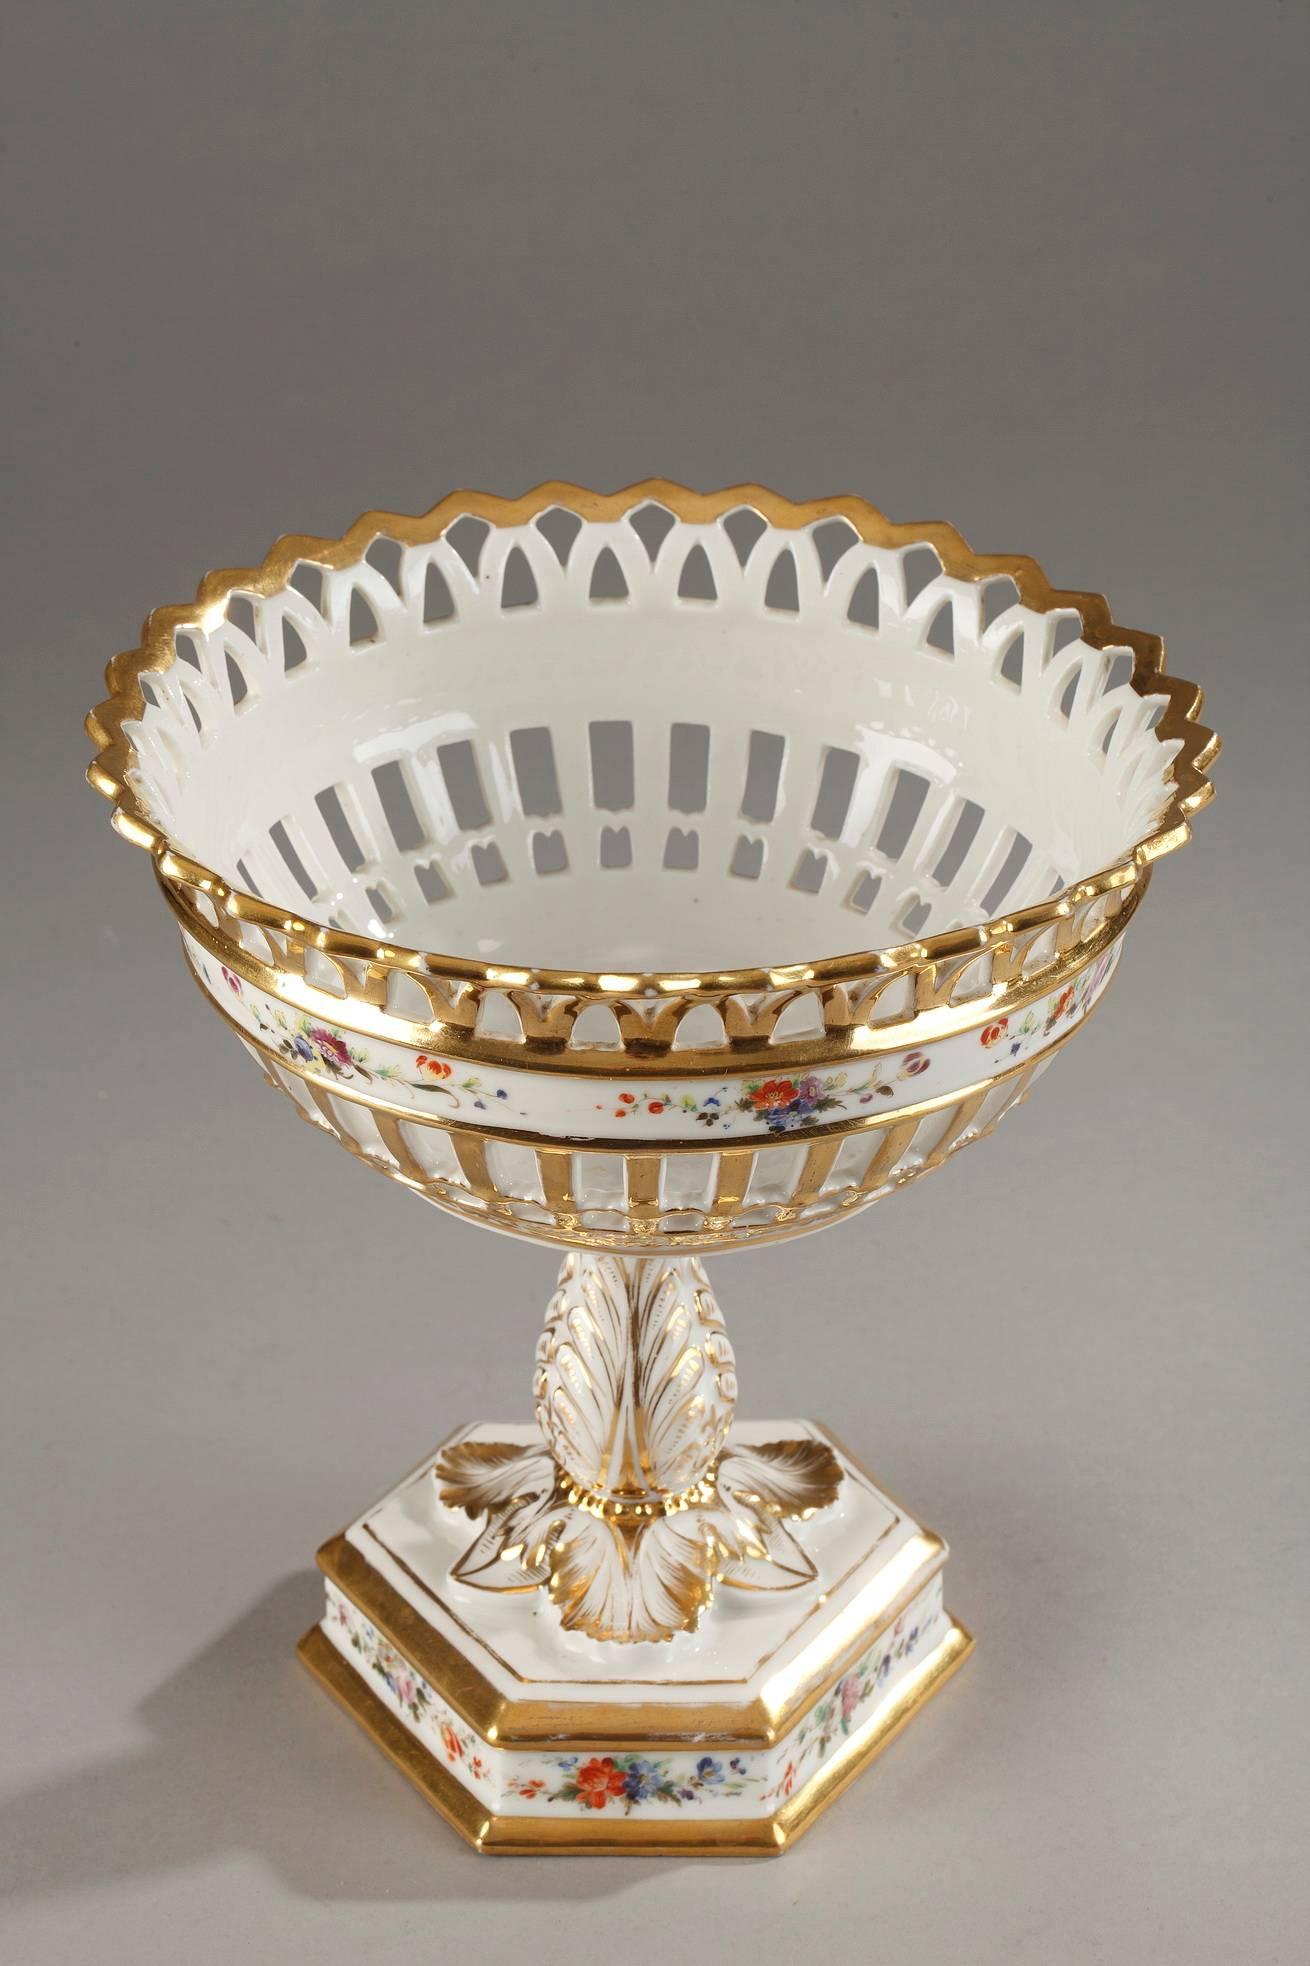 Pair of porcelain vases embellished with openwork lattices, multicolored flowers and gold palmettes. Each vase rests on a foliated pedestal foot and a terraced, hexagonal base. The set is enhanced with gilded sections,

circa 1840.

Dimension: W